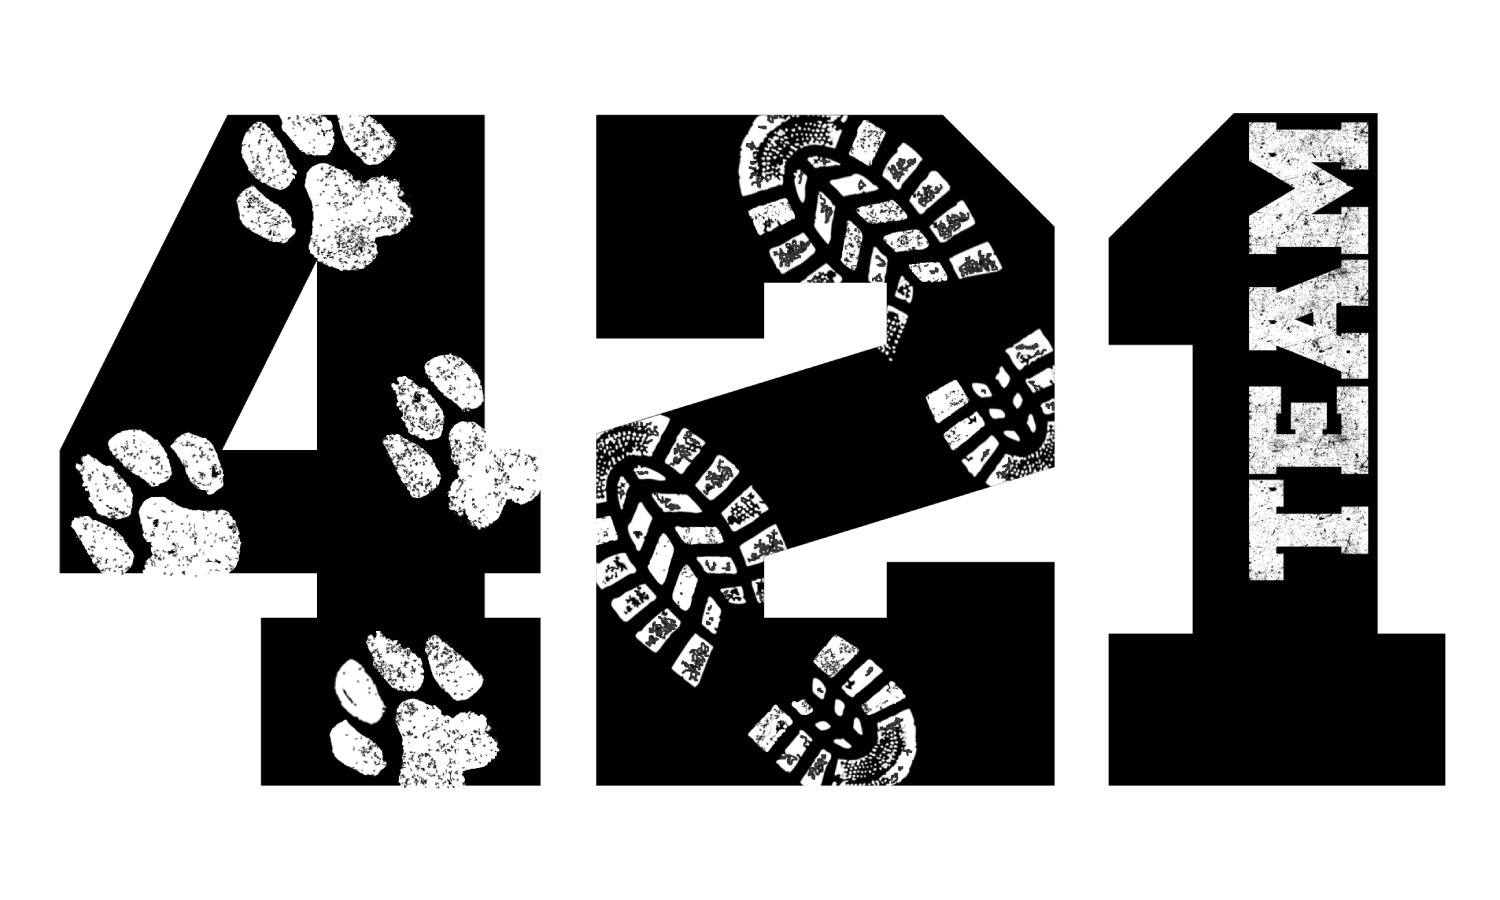 The numbers 421 in black. The 4 has white pawprints. The 2 has white footprints. The 1 has the word TEAM written in white.